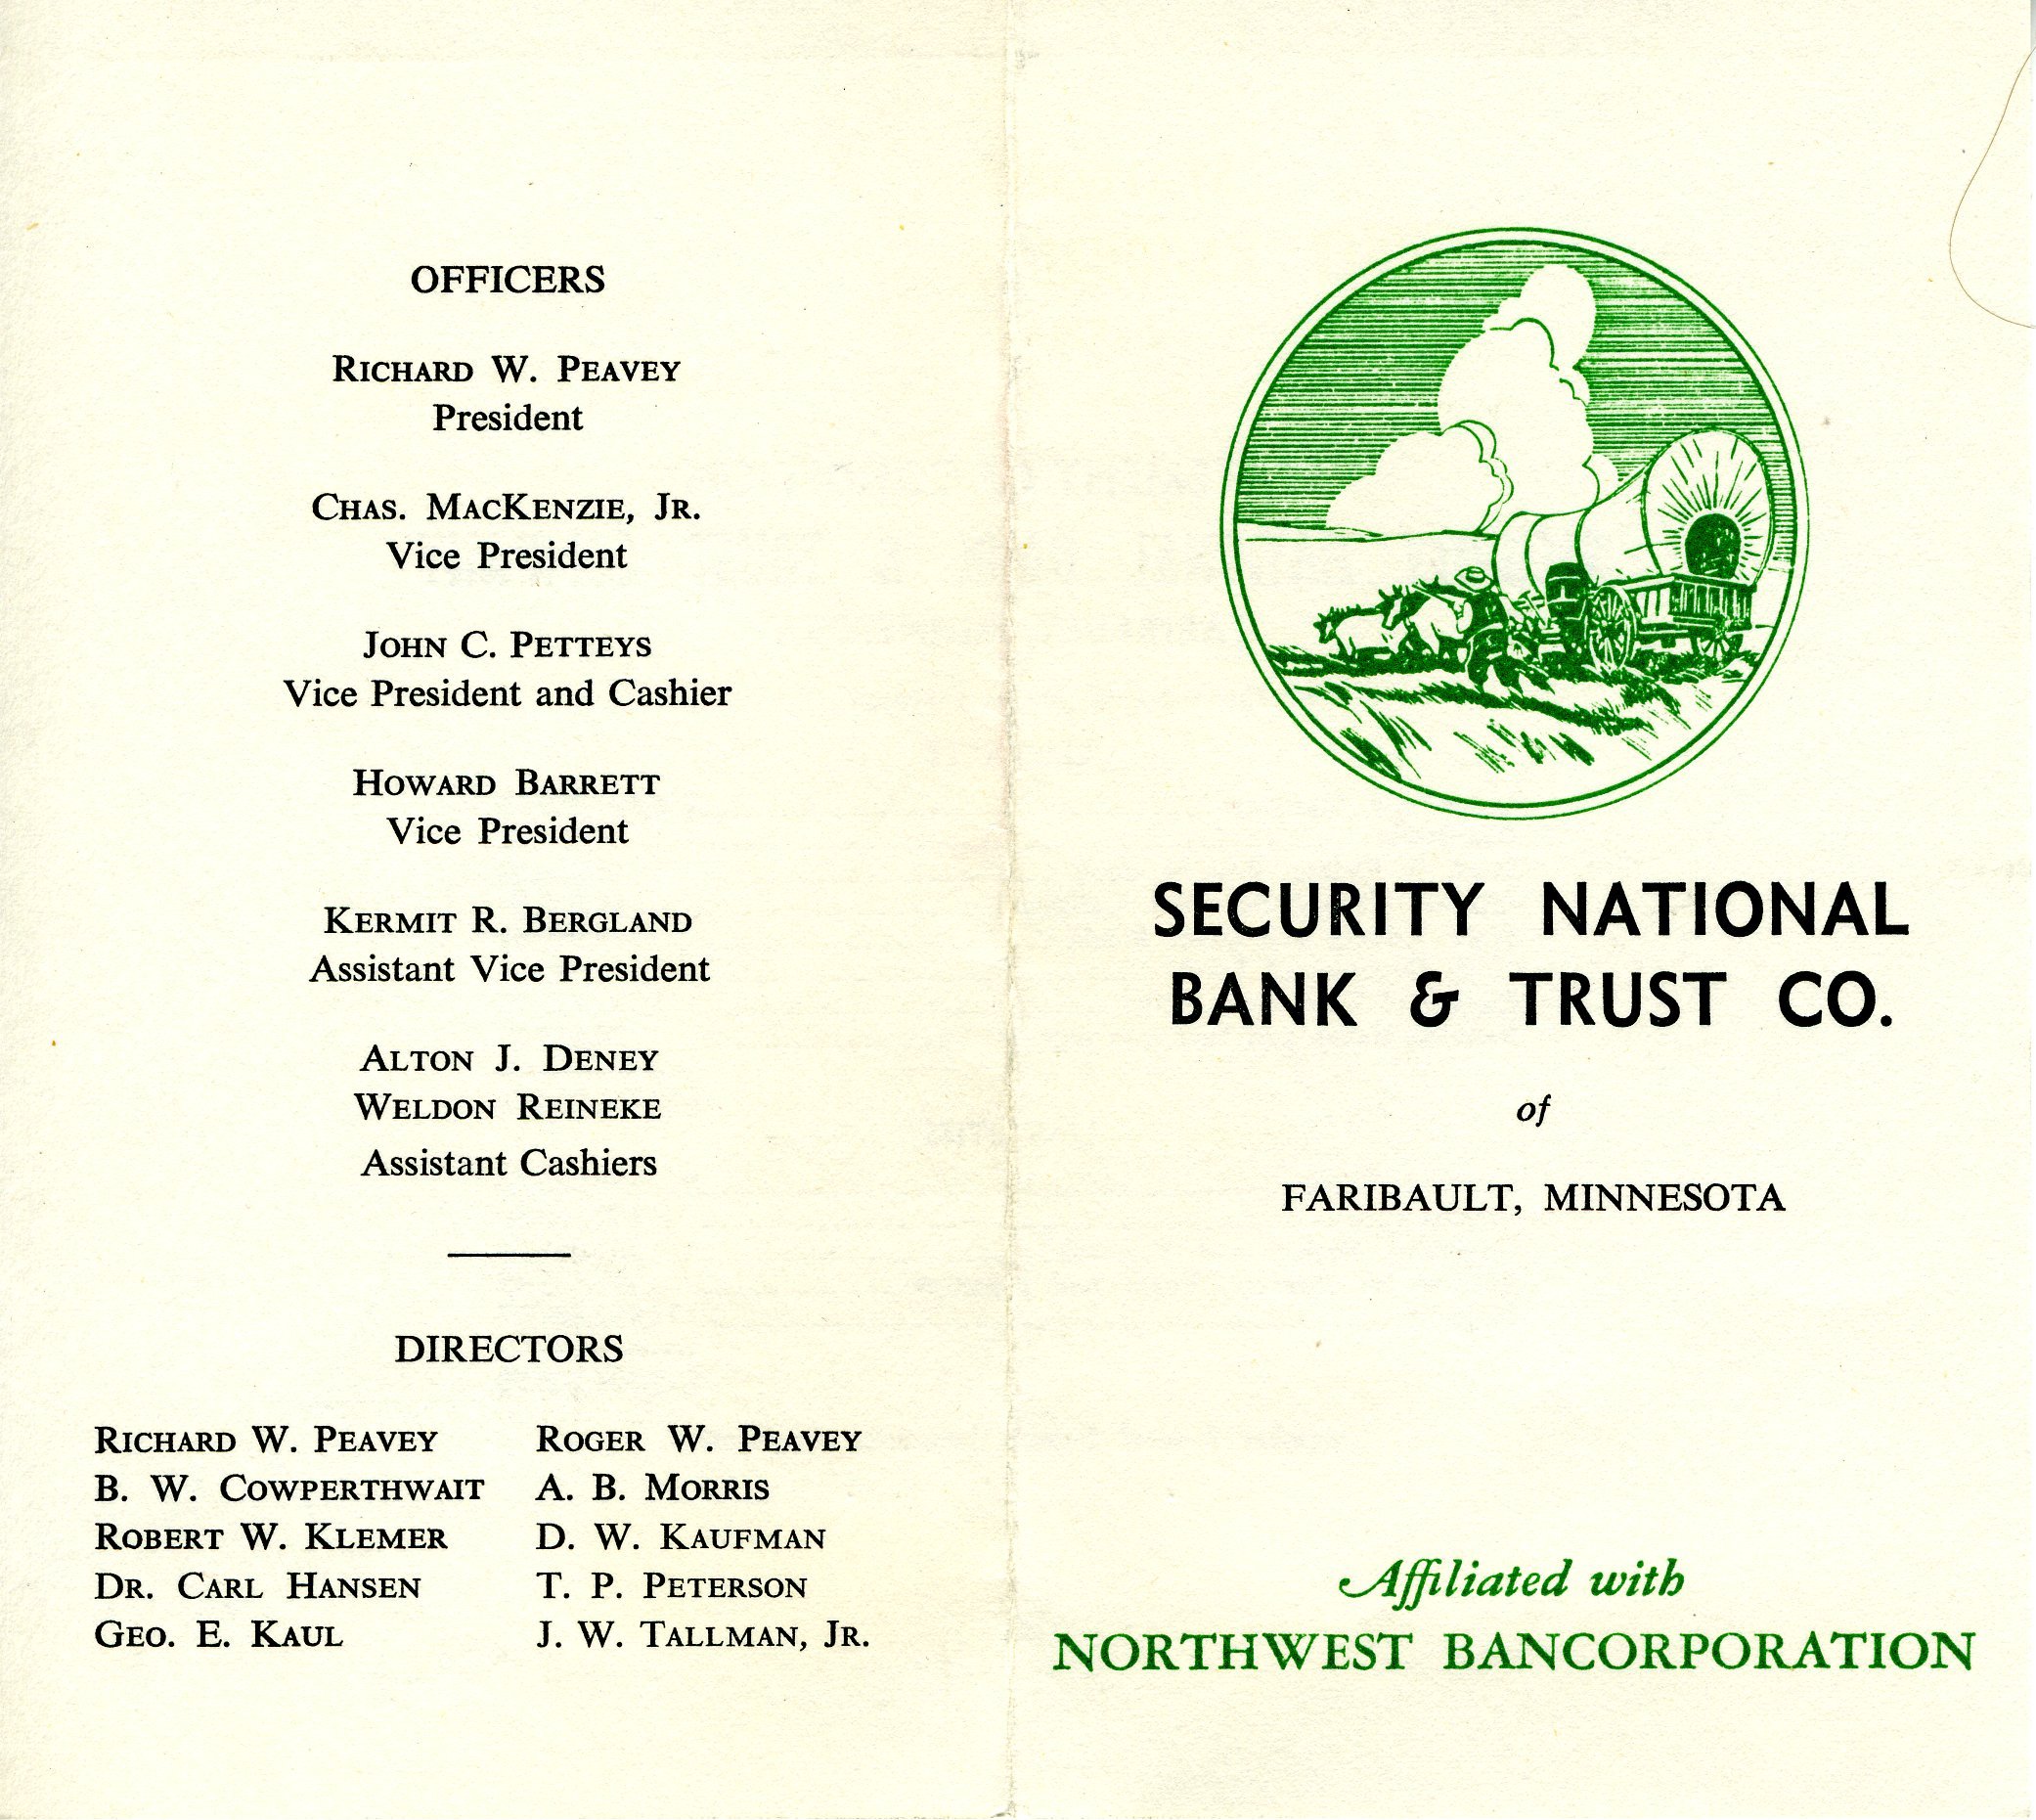 A bank brochure opened to two sides. The right-side reads: Security National Bank & Trust Co. of Faribault, Minnesota Affiliated with Northwest BANCORPORATION. Left side reads the name of the officers.